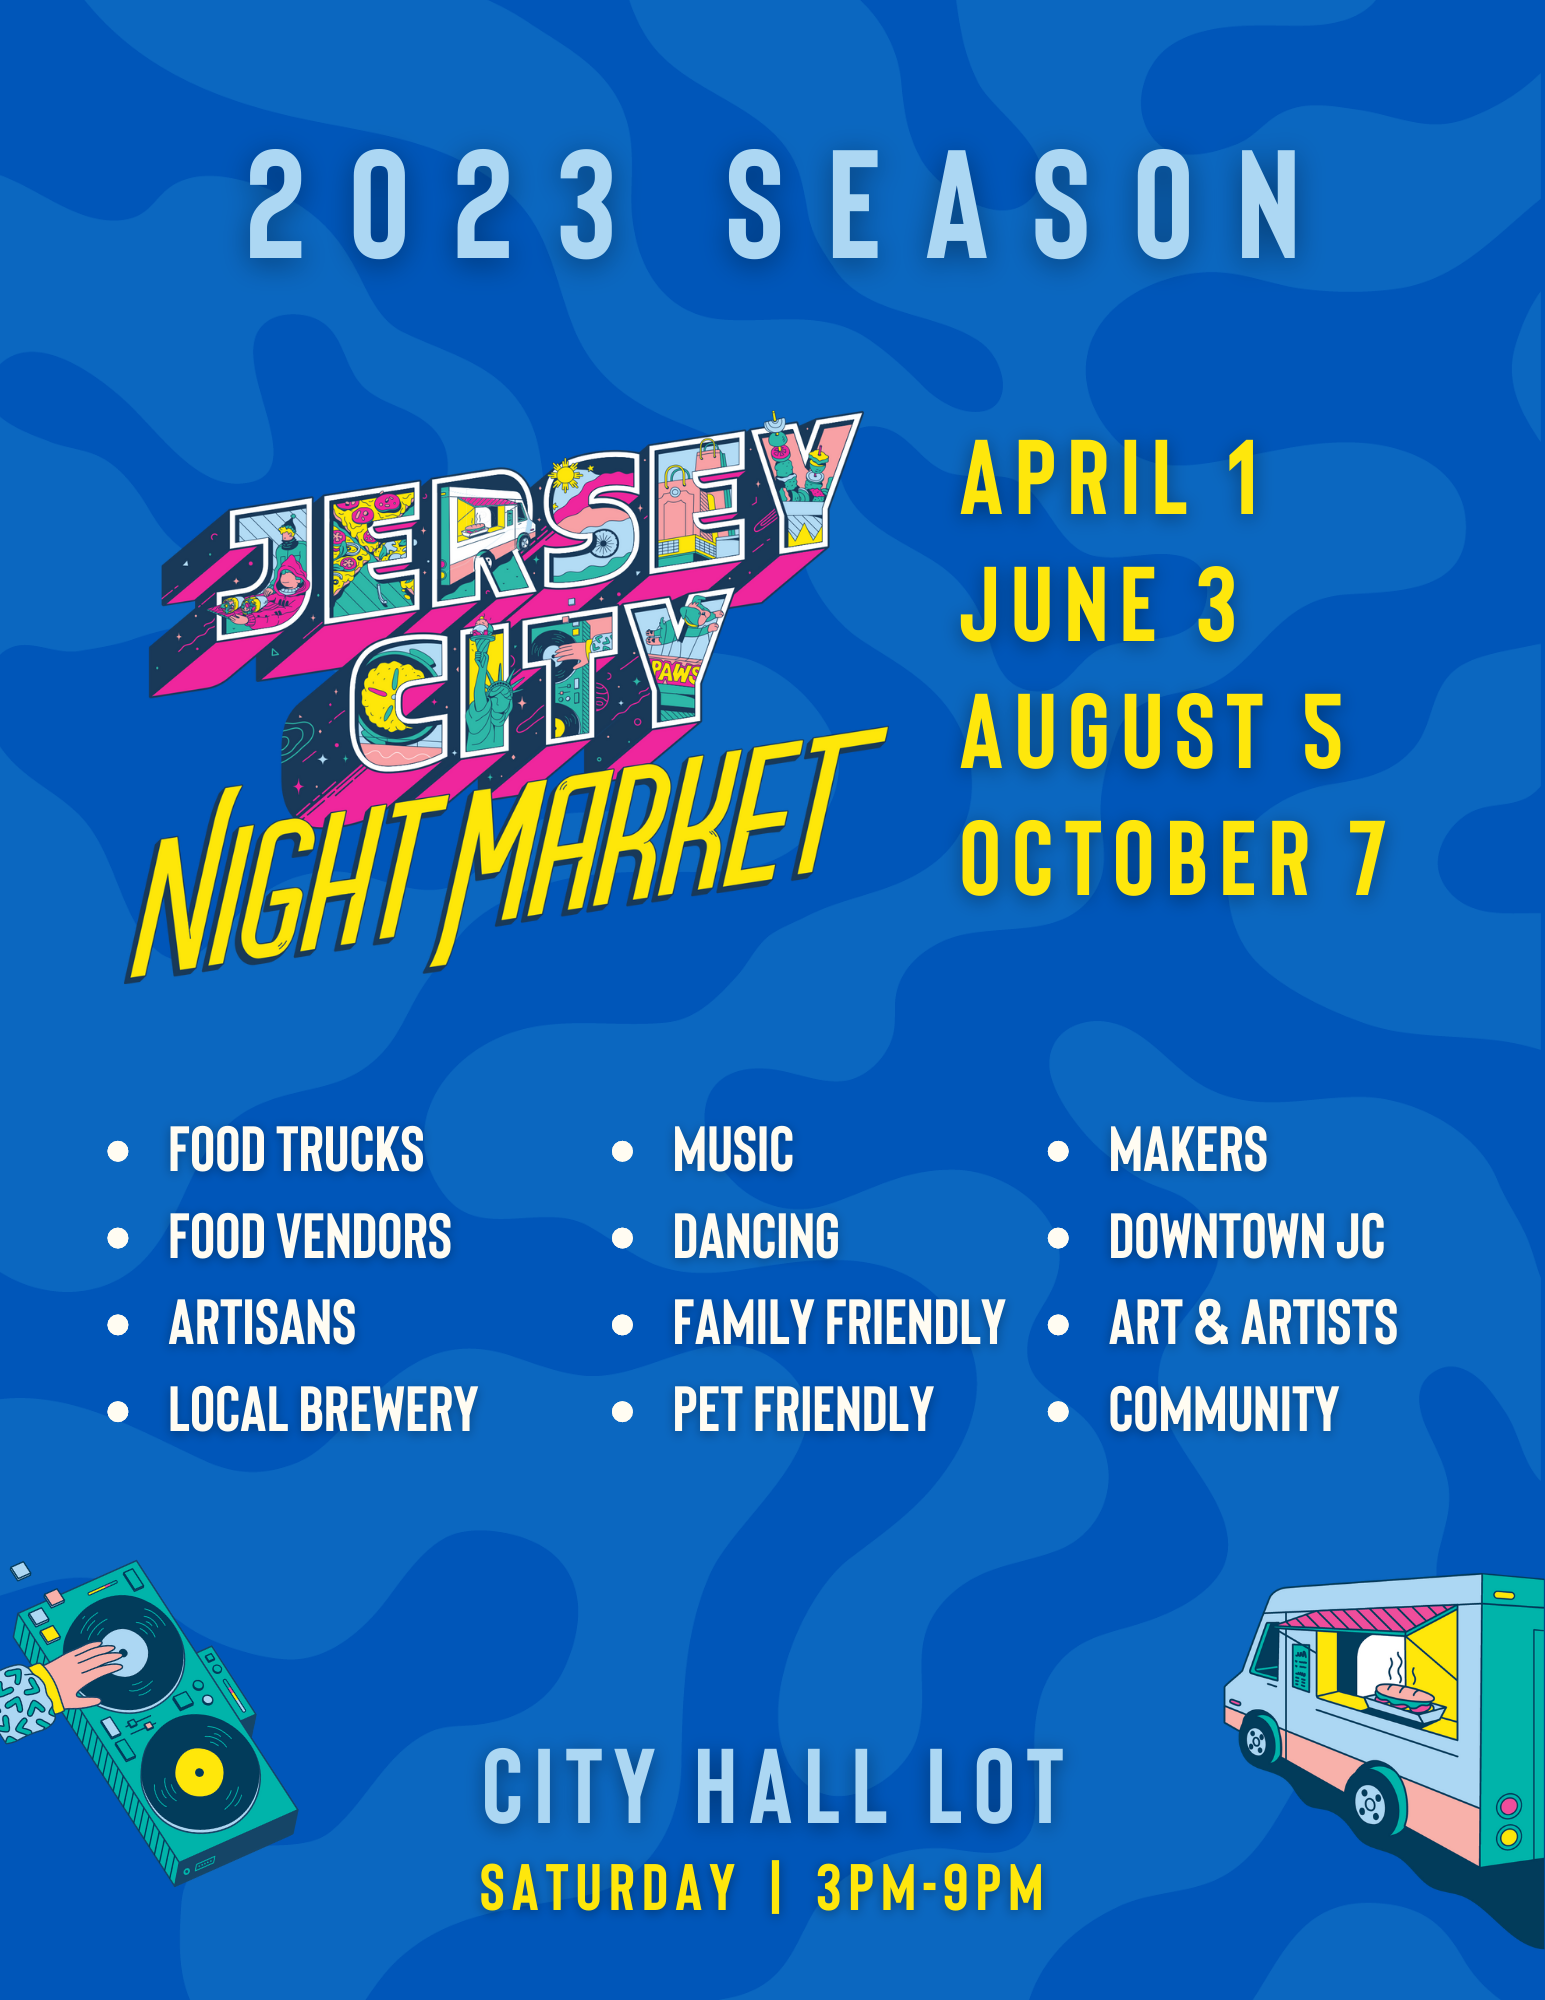 THE JERSEY CITY NIGHT MARKET OCTOBER 7TH FROM 3PM TO 9PM AT THE CITY HALL LOT ON MARIN AND MONTGOMERY AVE.